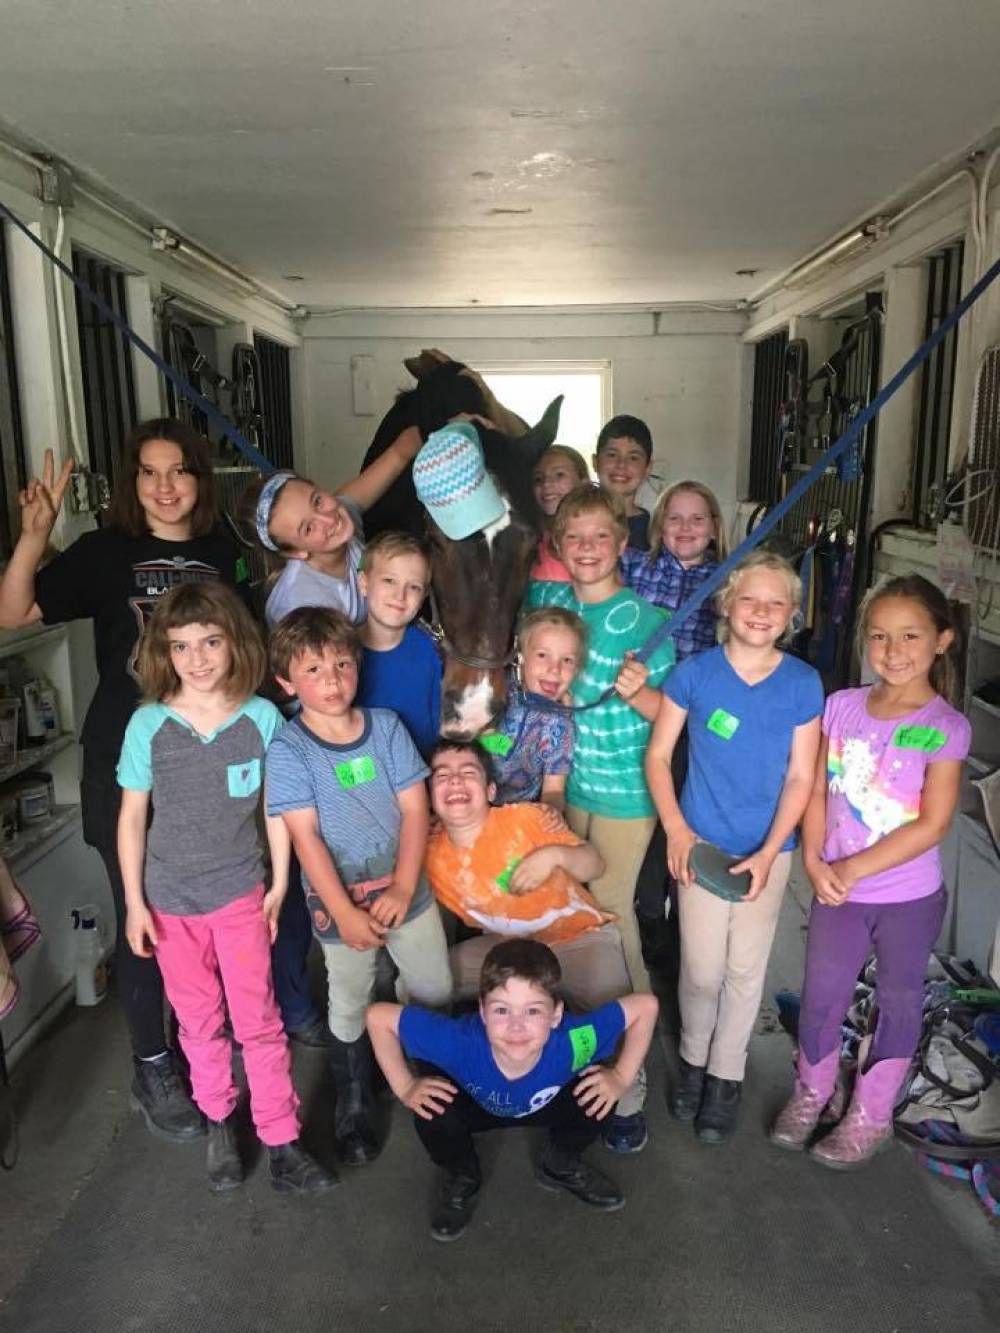 TOP RHODE ISLAND SUMMER CAMP: Faith Hill Farm is a Top Summer Camp located in East Greenwich Rhode Island offering many fun and enriching camp programs. 